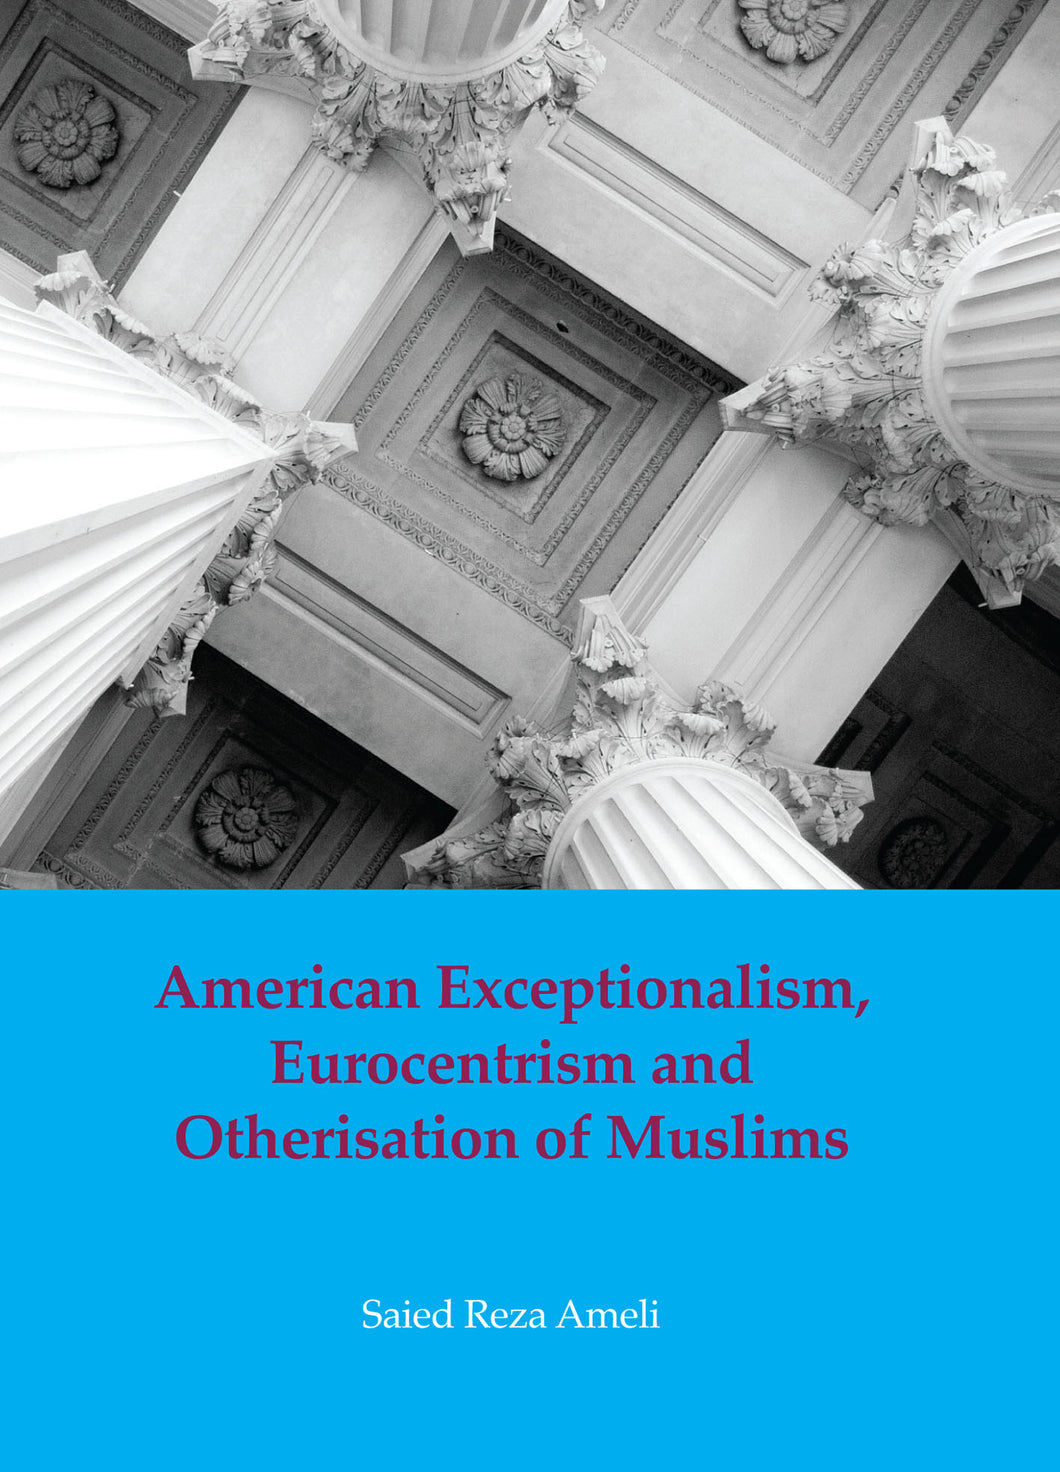 American Exceptionalism, Eurocentrism and Otherization of Muslims